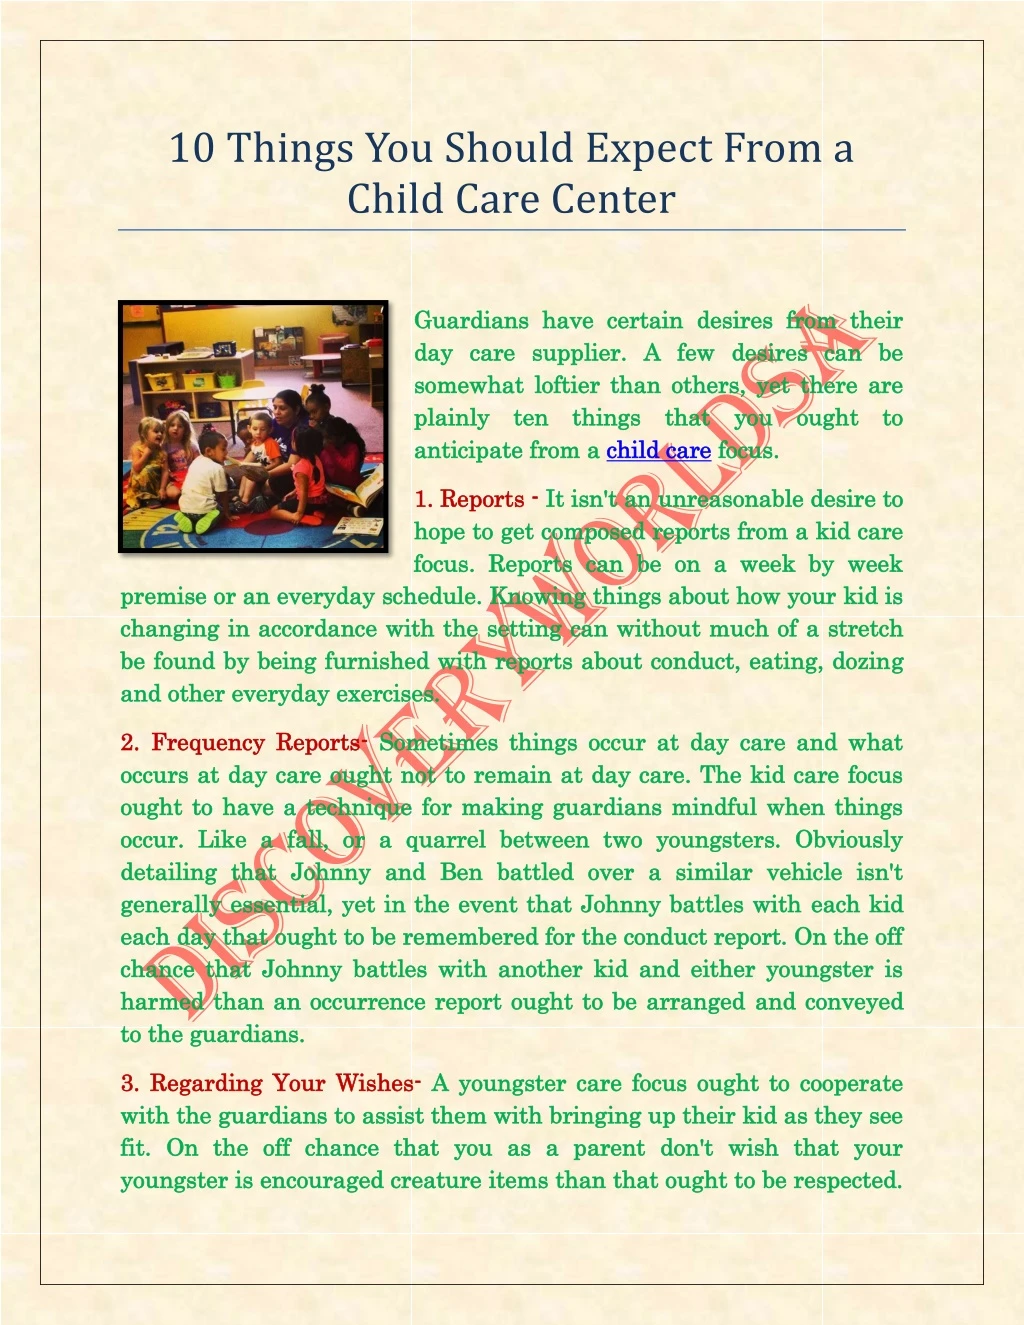 10 things you should expect from a child care